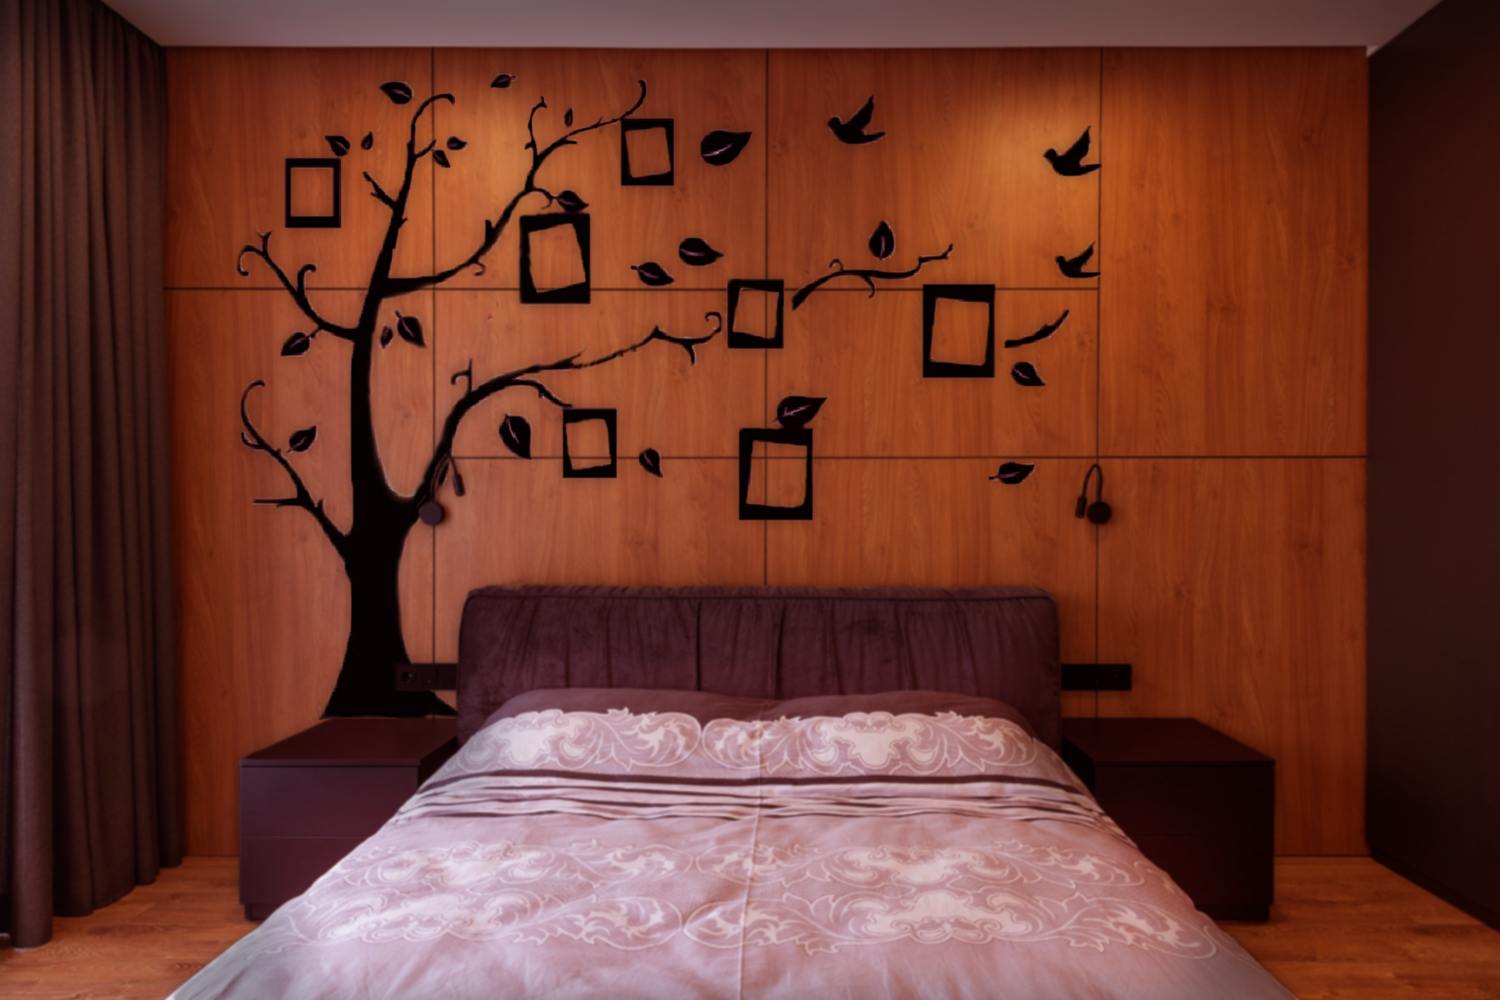 ColourDrive-Royale Luxury Emulsion Family Tree House Wall Stencil Design Painting  for Bedroom,Study Room,Guest Room